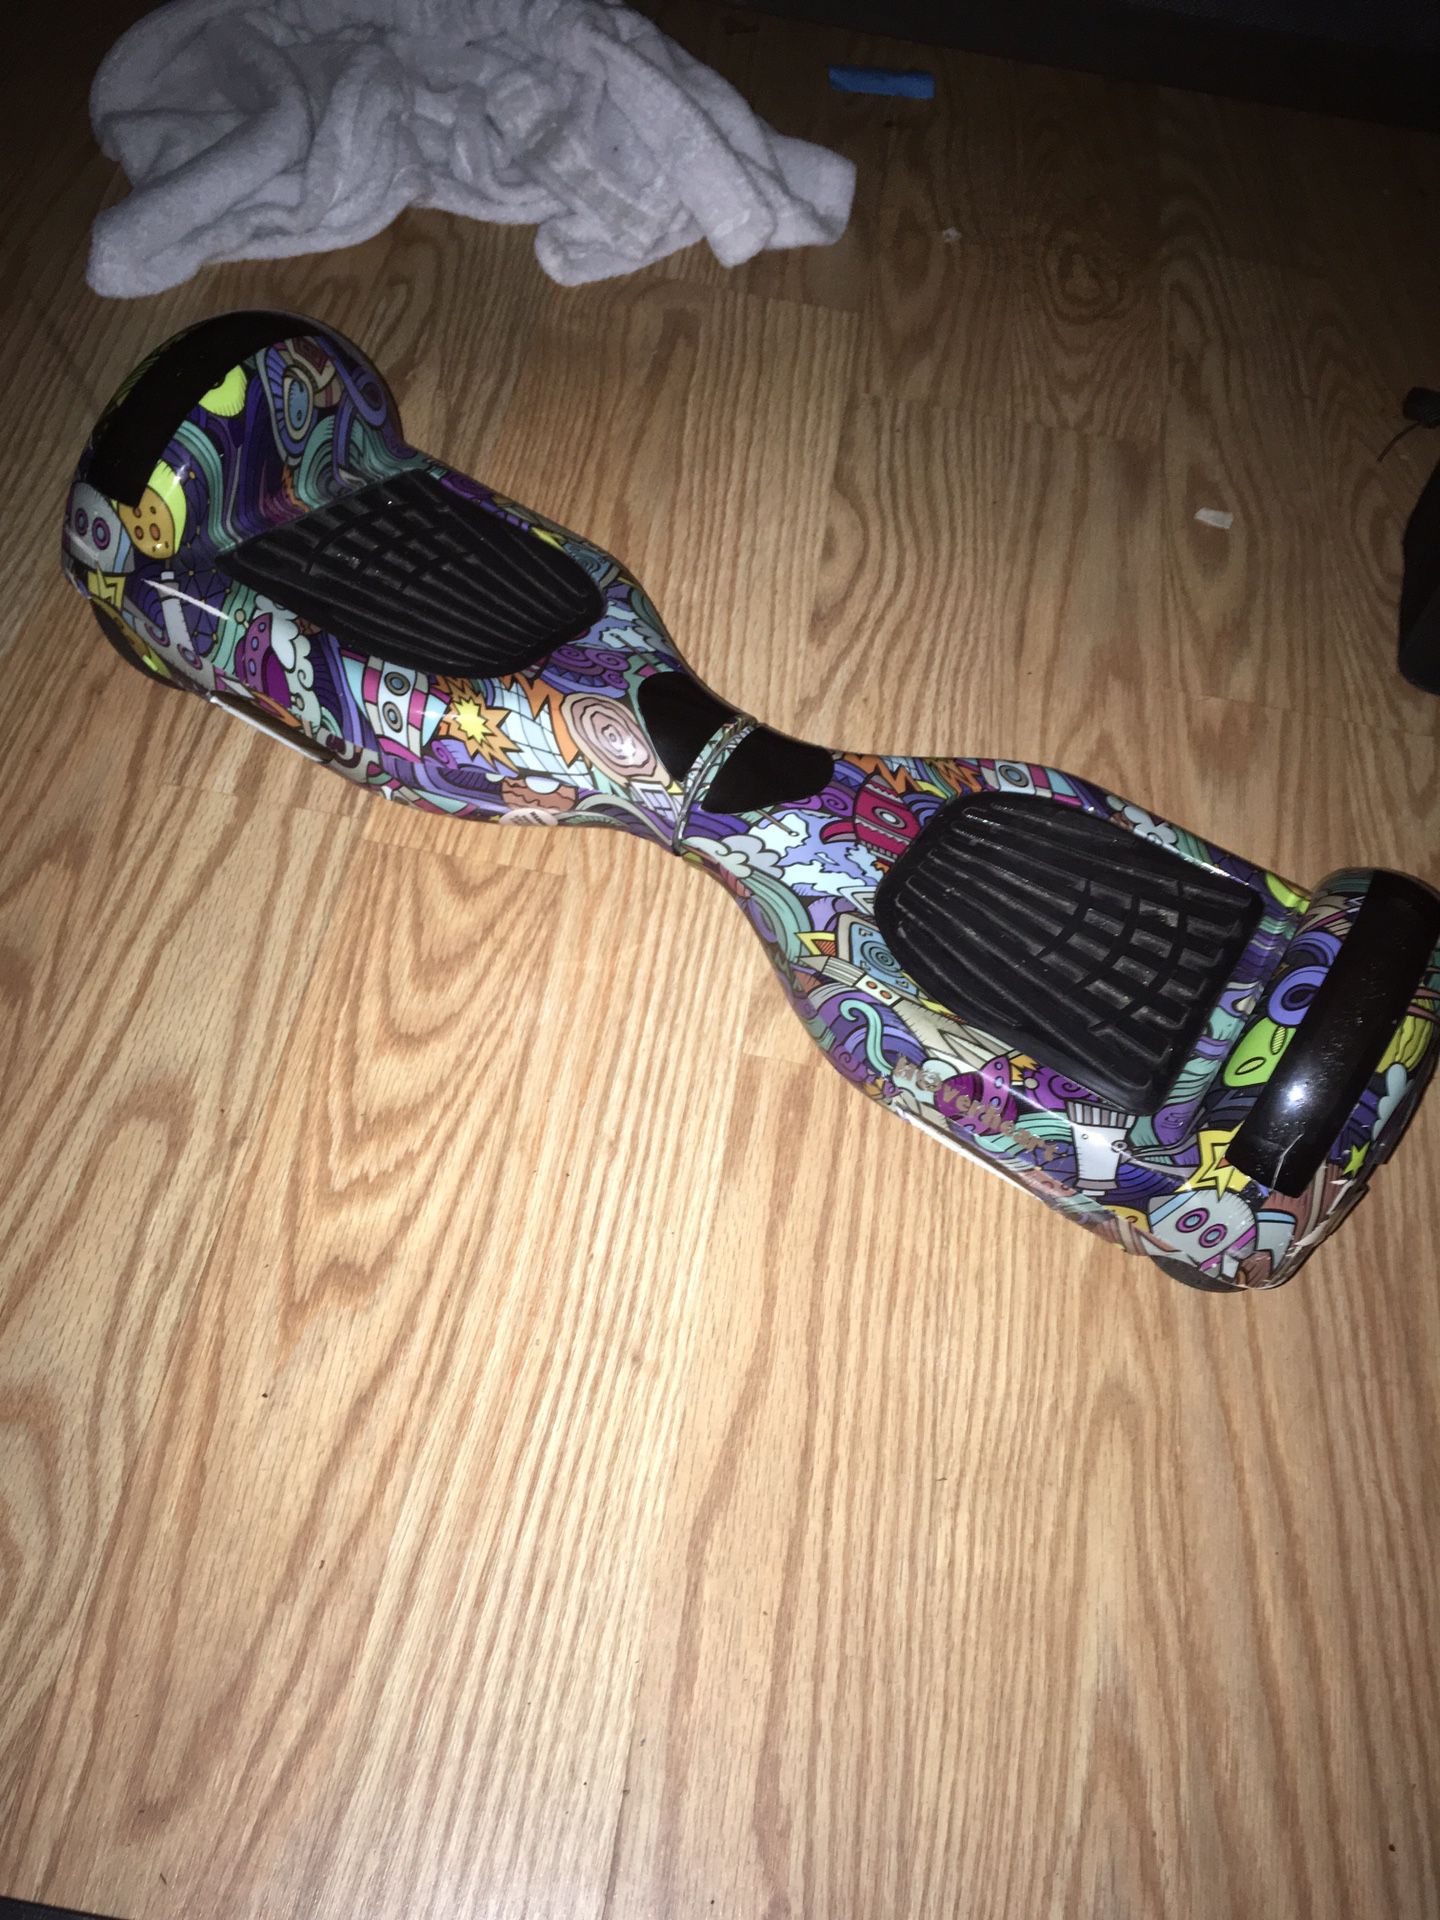 Hover board with Bluetooth and lights